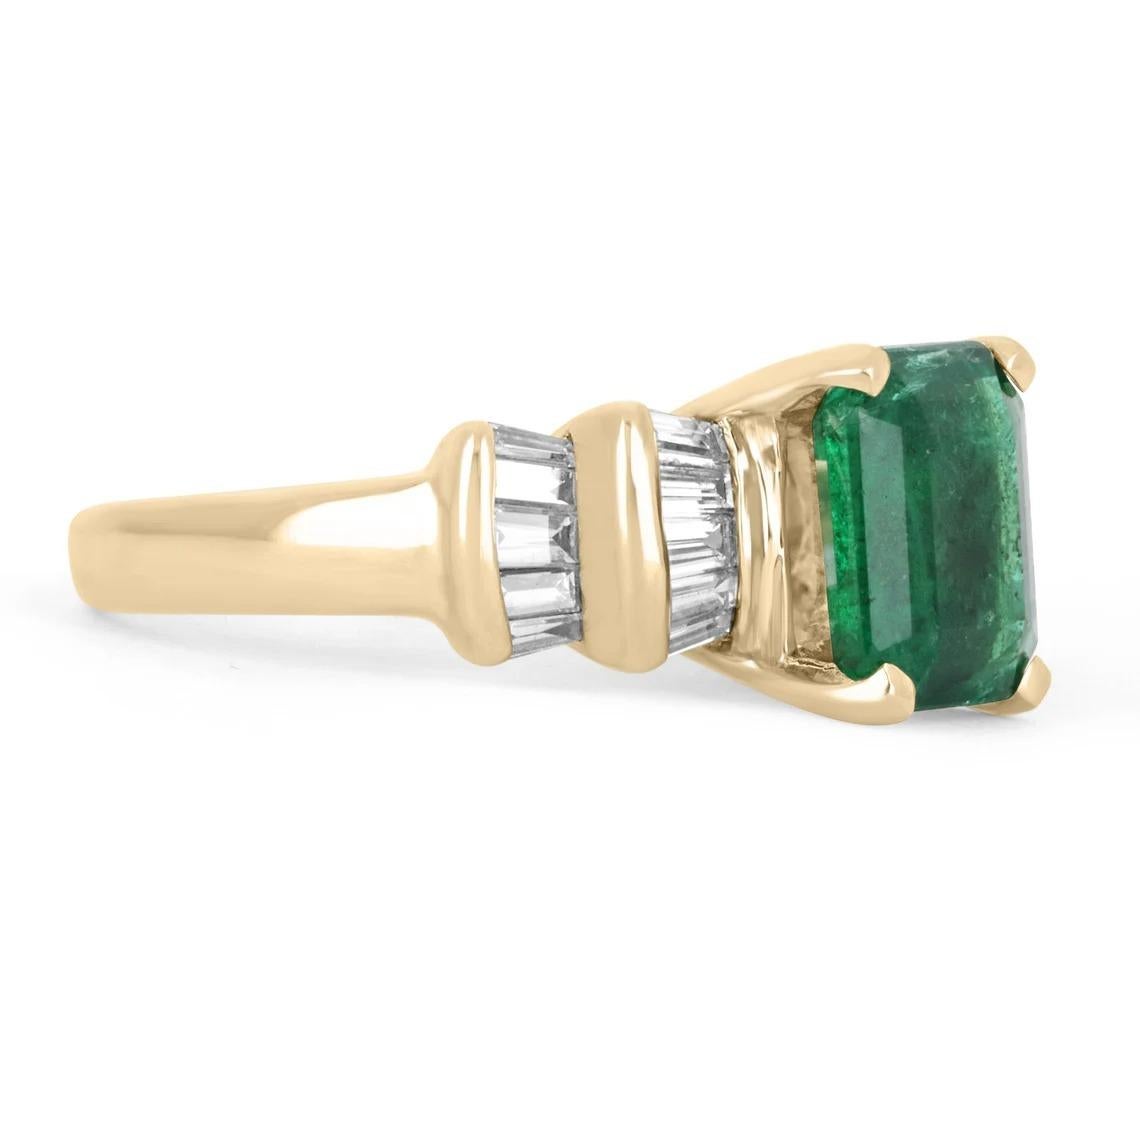 Featured is a stunning emerald and diamond ring. The center stone carries a gorgeous 3.03-carat, natural emerald; displaying a dark green color and very good luster. Minor imperfections can be seen, but are natural in earth-mined gems. An array of